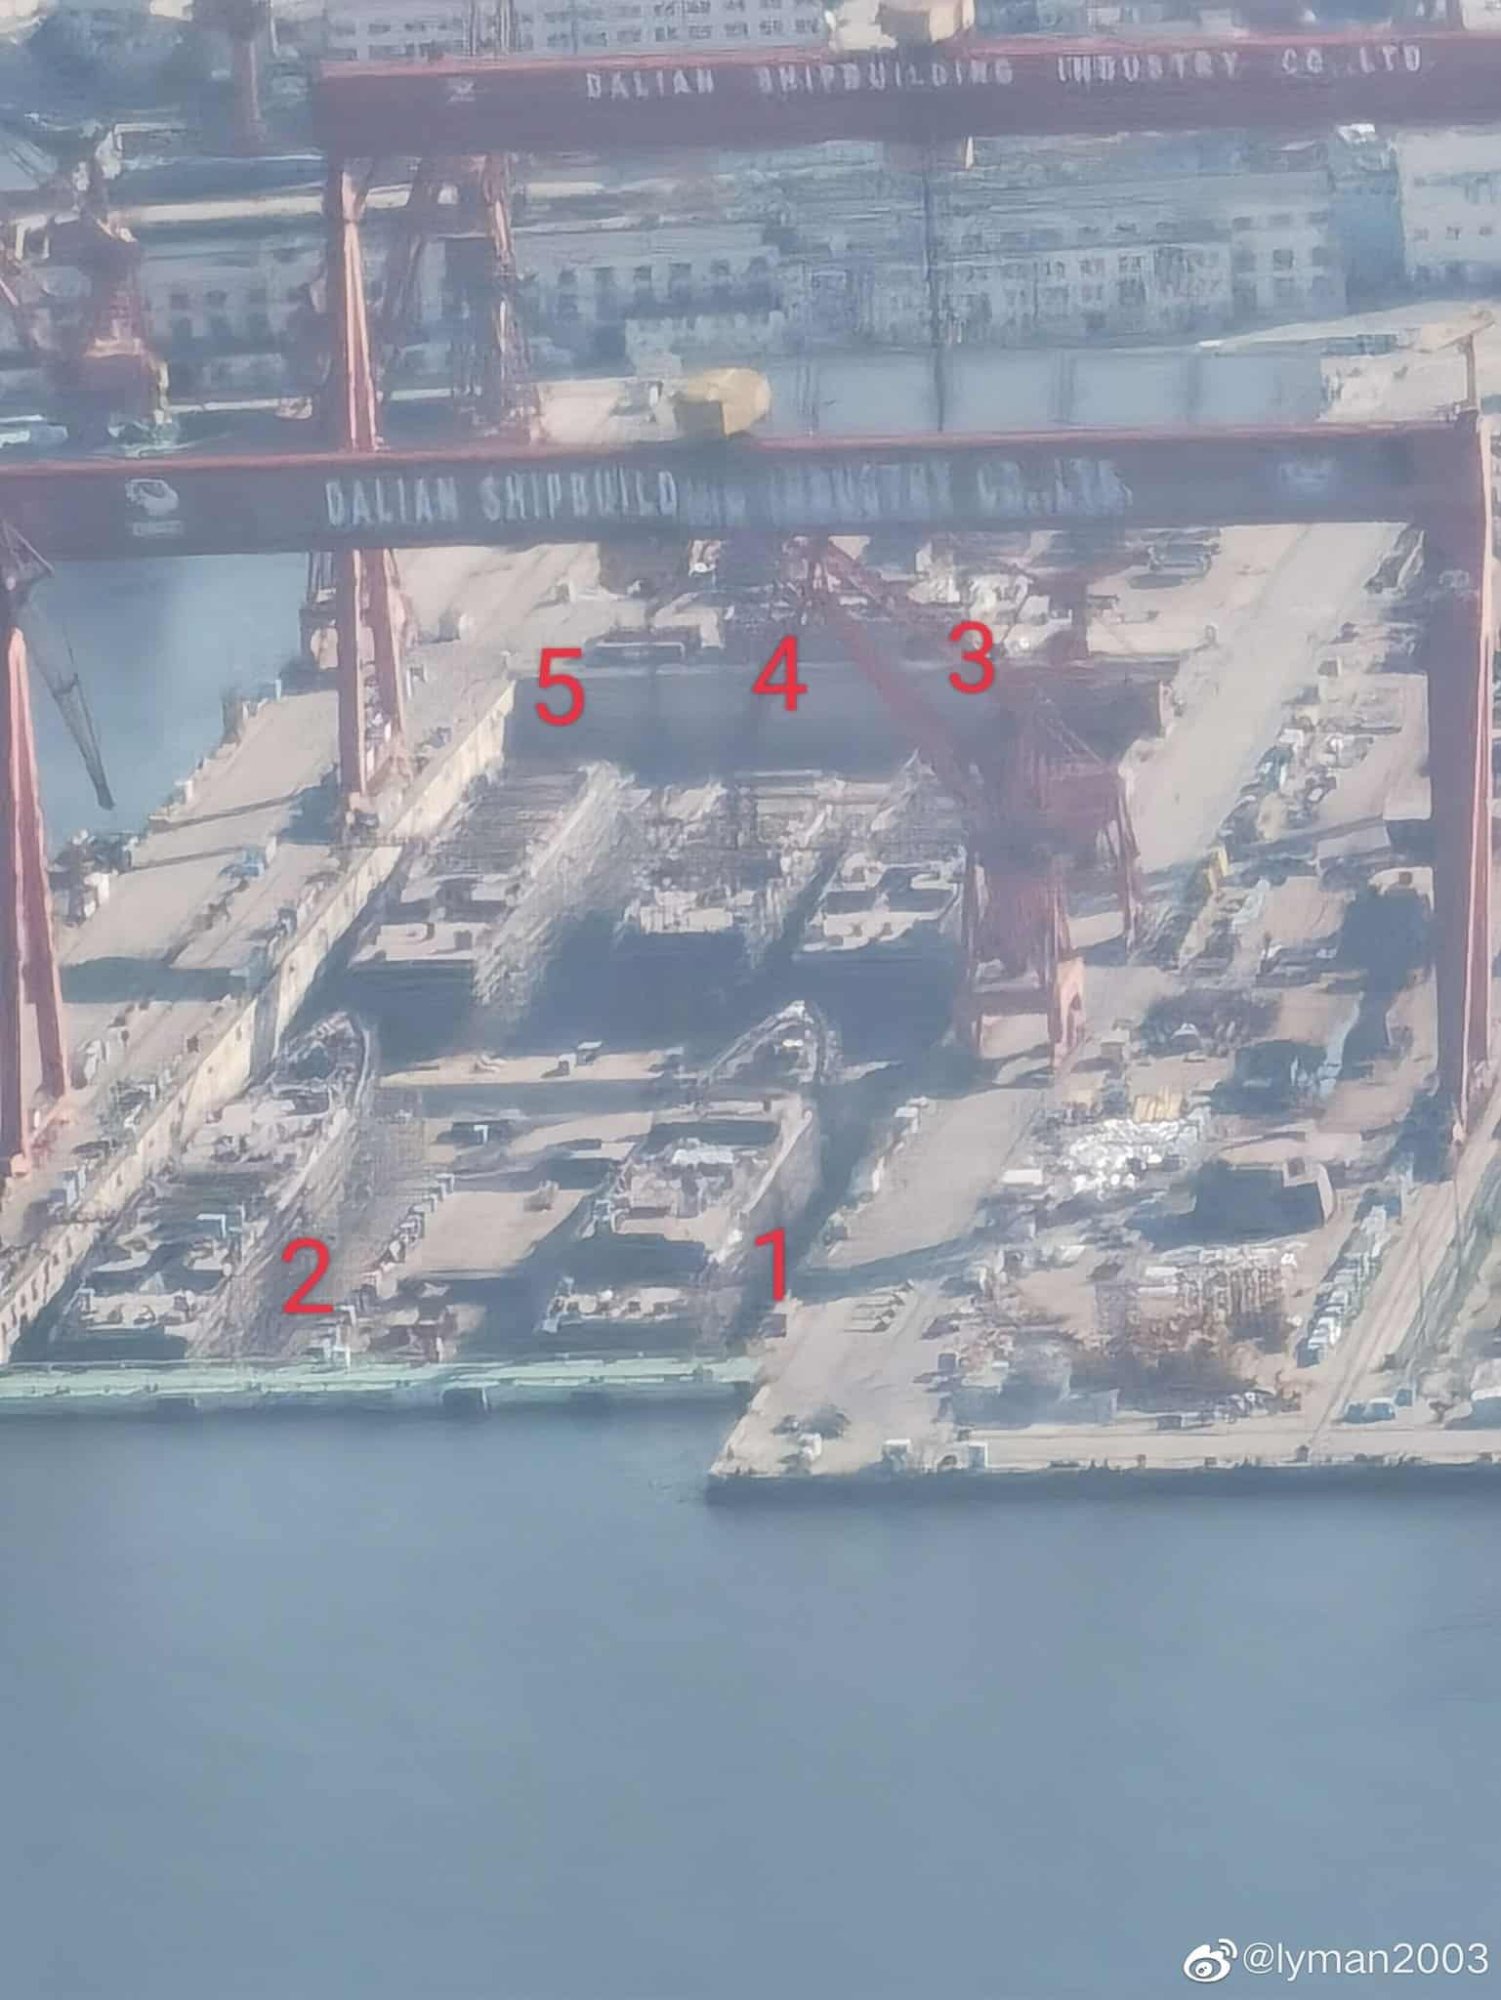 Five-Type-052D-Destroyers-Under-Construction-in-China (1).jpg